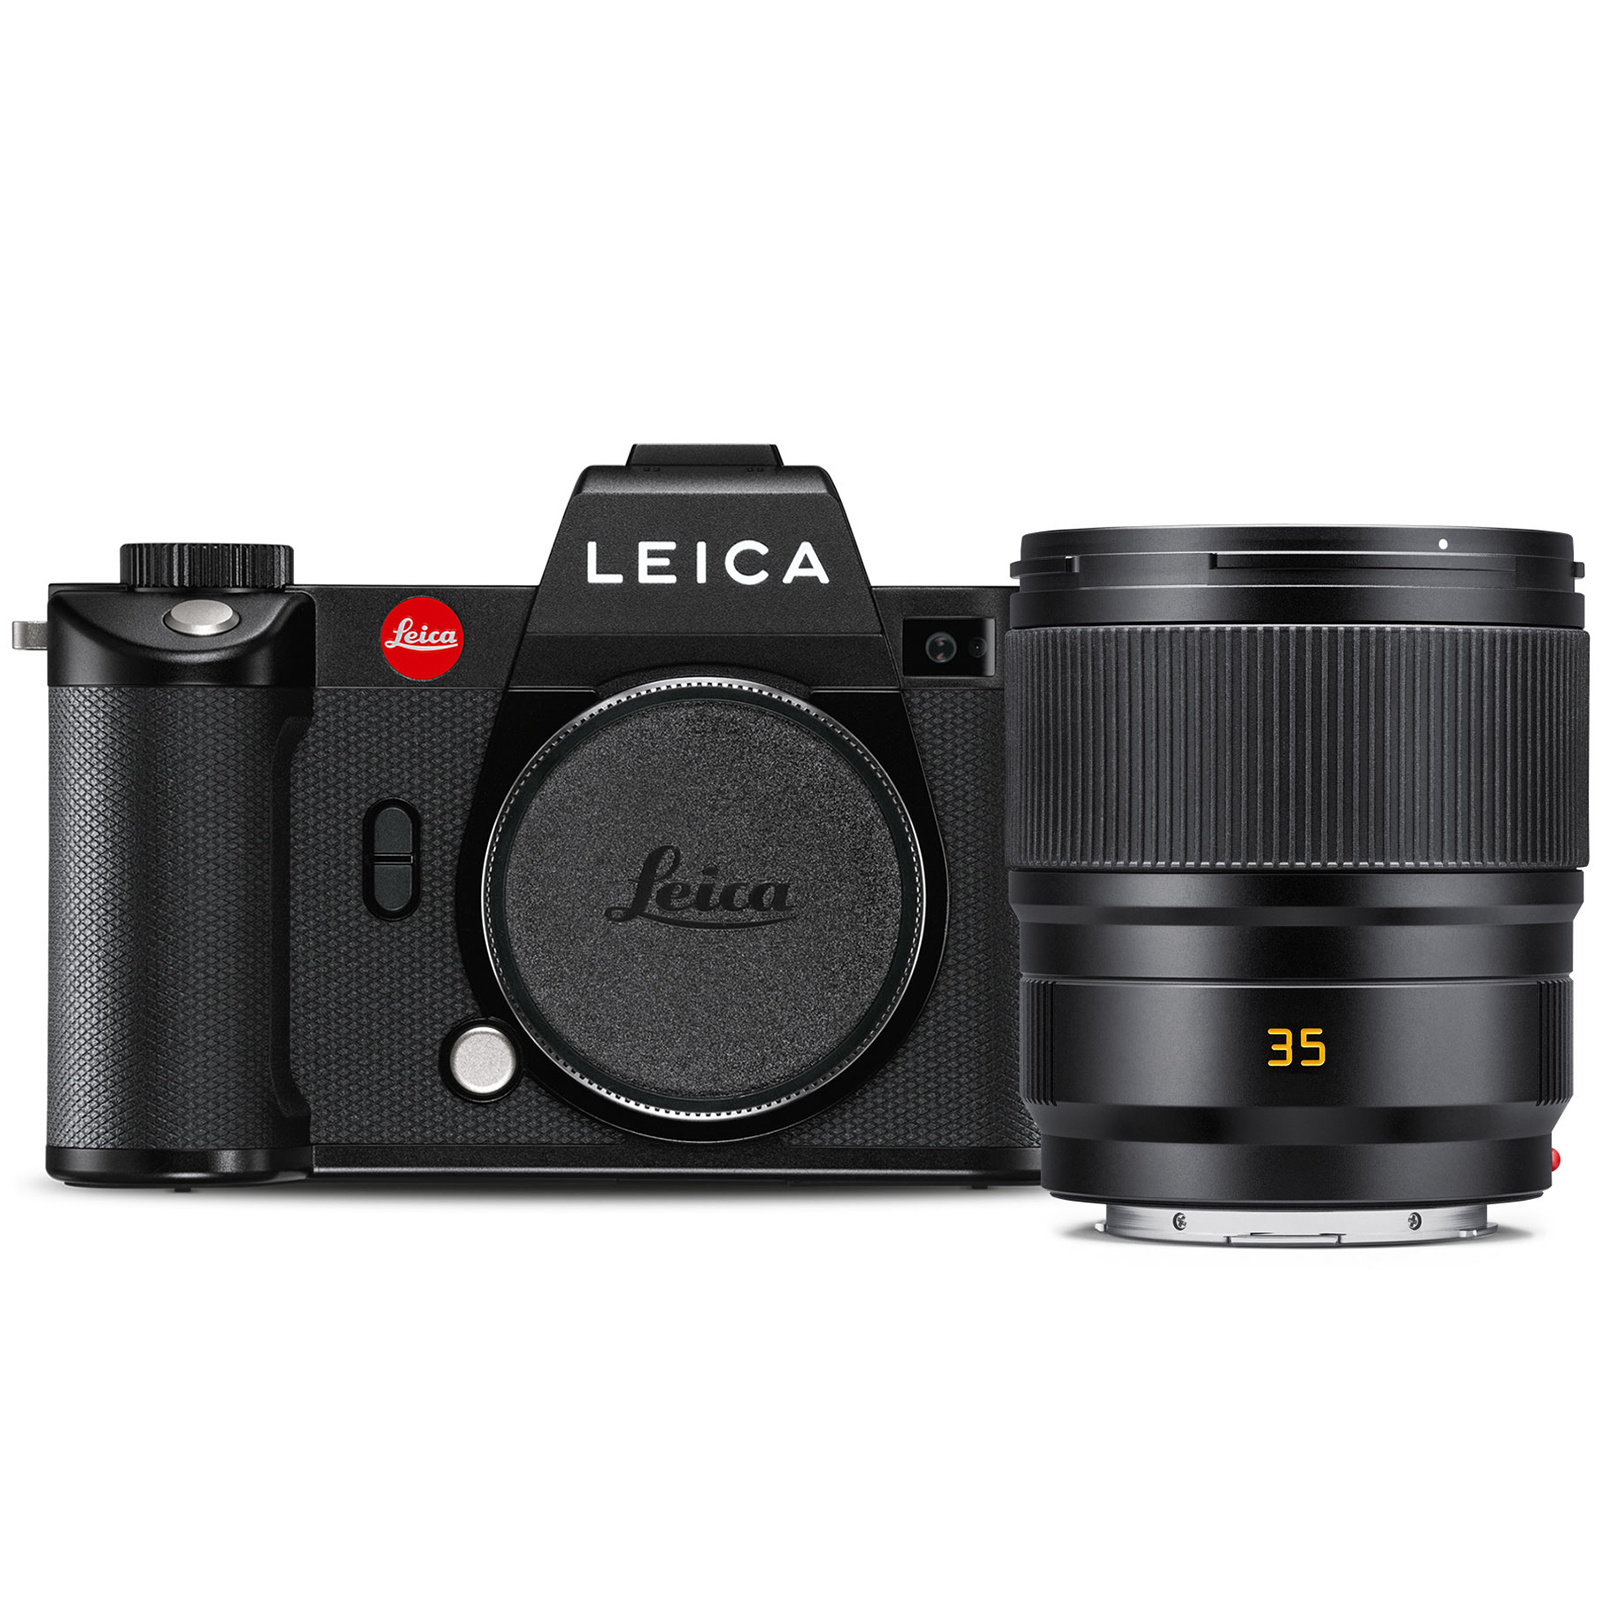 Image of Leica SL2 Digital Camera with 35mm f2 SummicronSL ASPH Lens